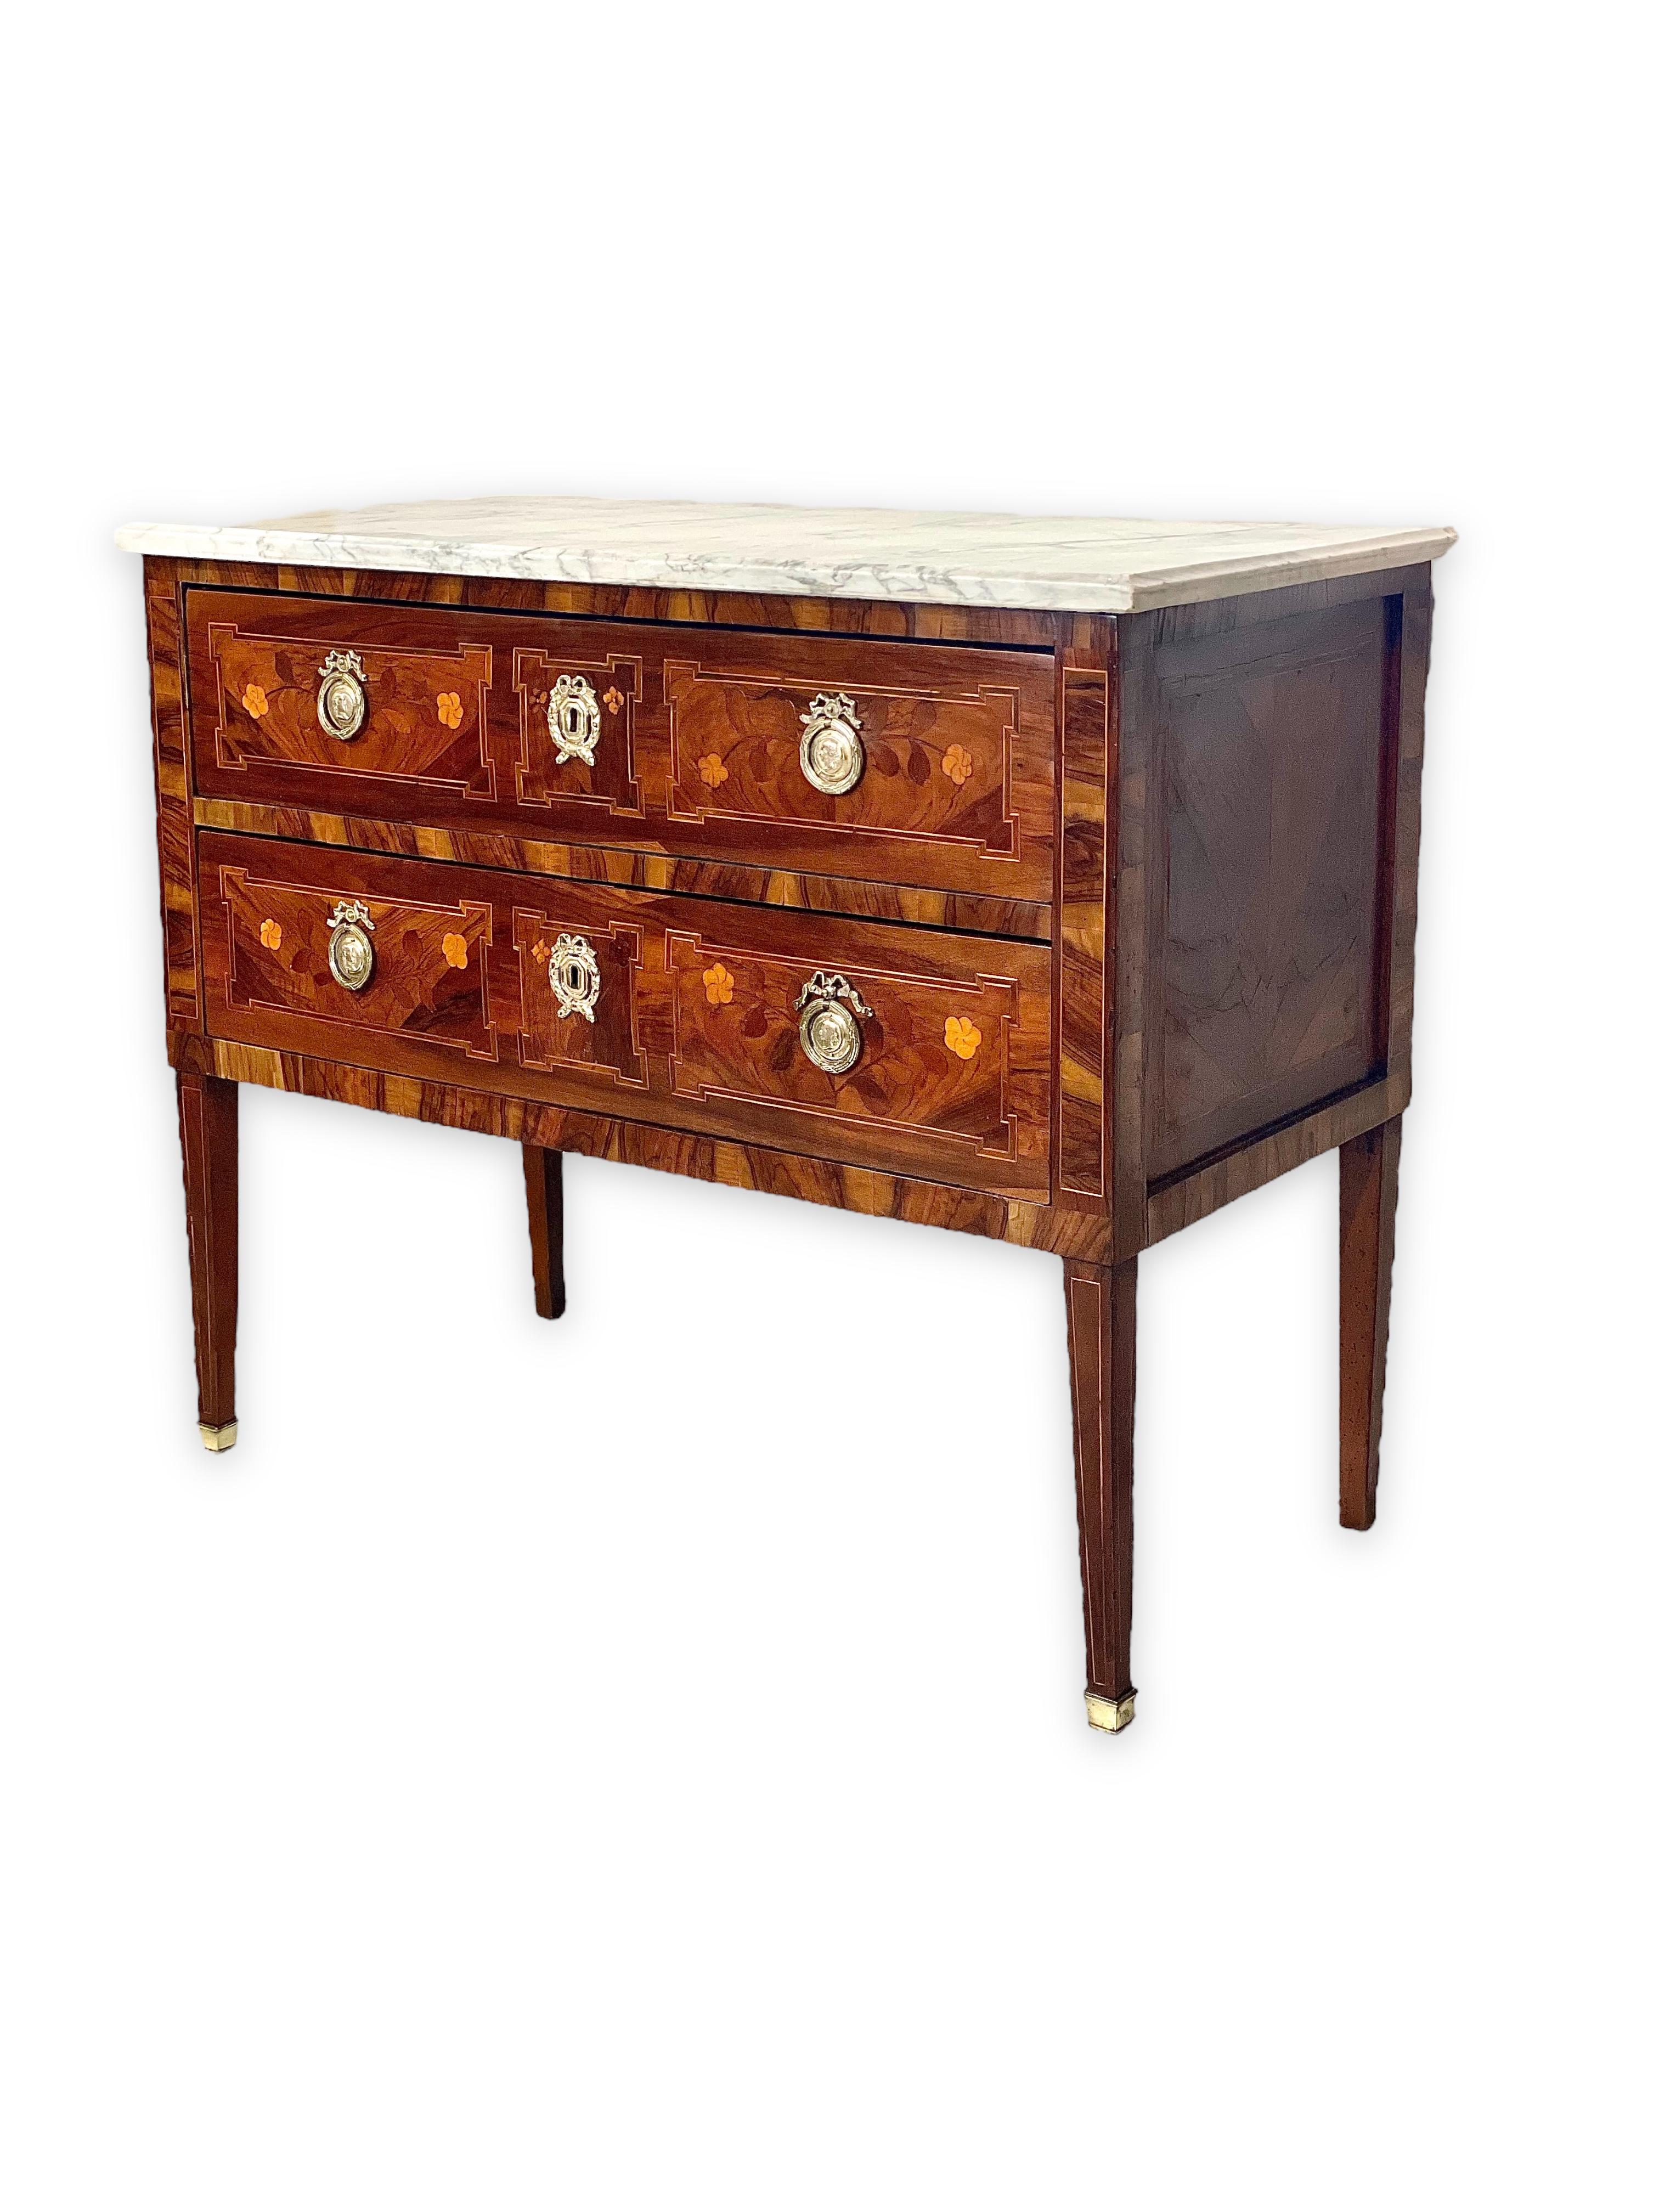 An exquisite, early 19th century Louis XVI style two-drawer 'Commode Sauteuse', with a white marble top and gilt bronze fittings. This curiously named style of commode always features two drawers perched on high legs, which gives the amusing